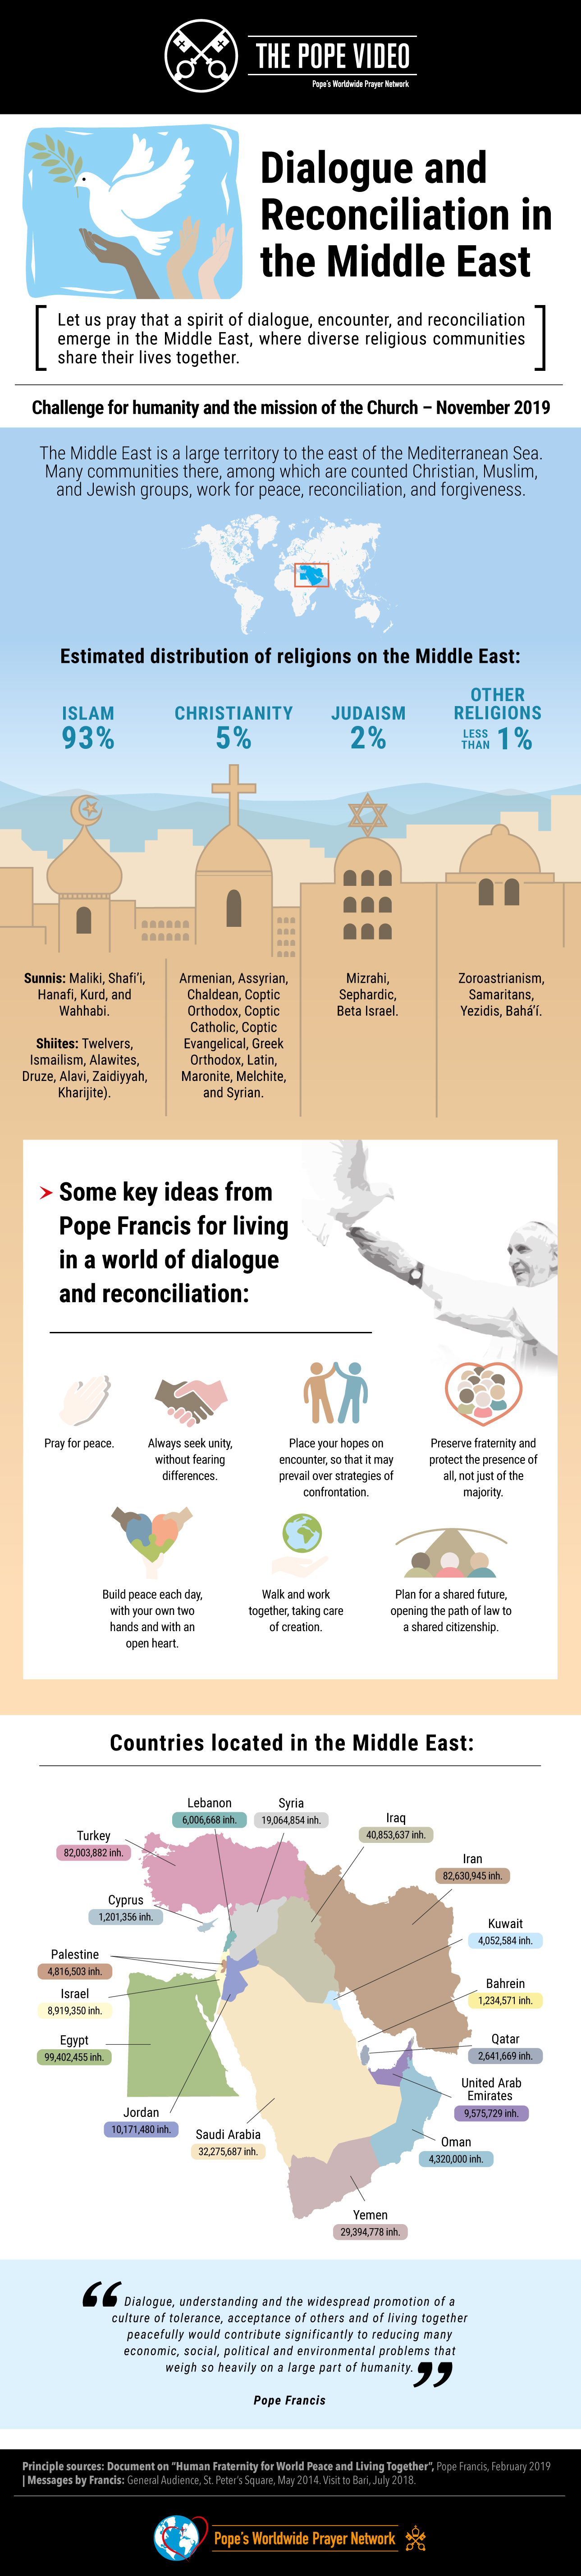 infographic-tpv-11-2019-en-the-pope-video-dialogue-and-reconciliation-in-the-middle-east.jpg